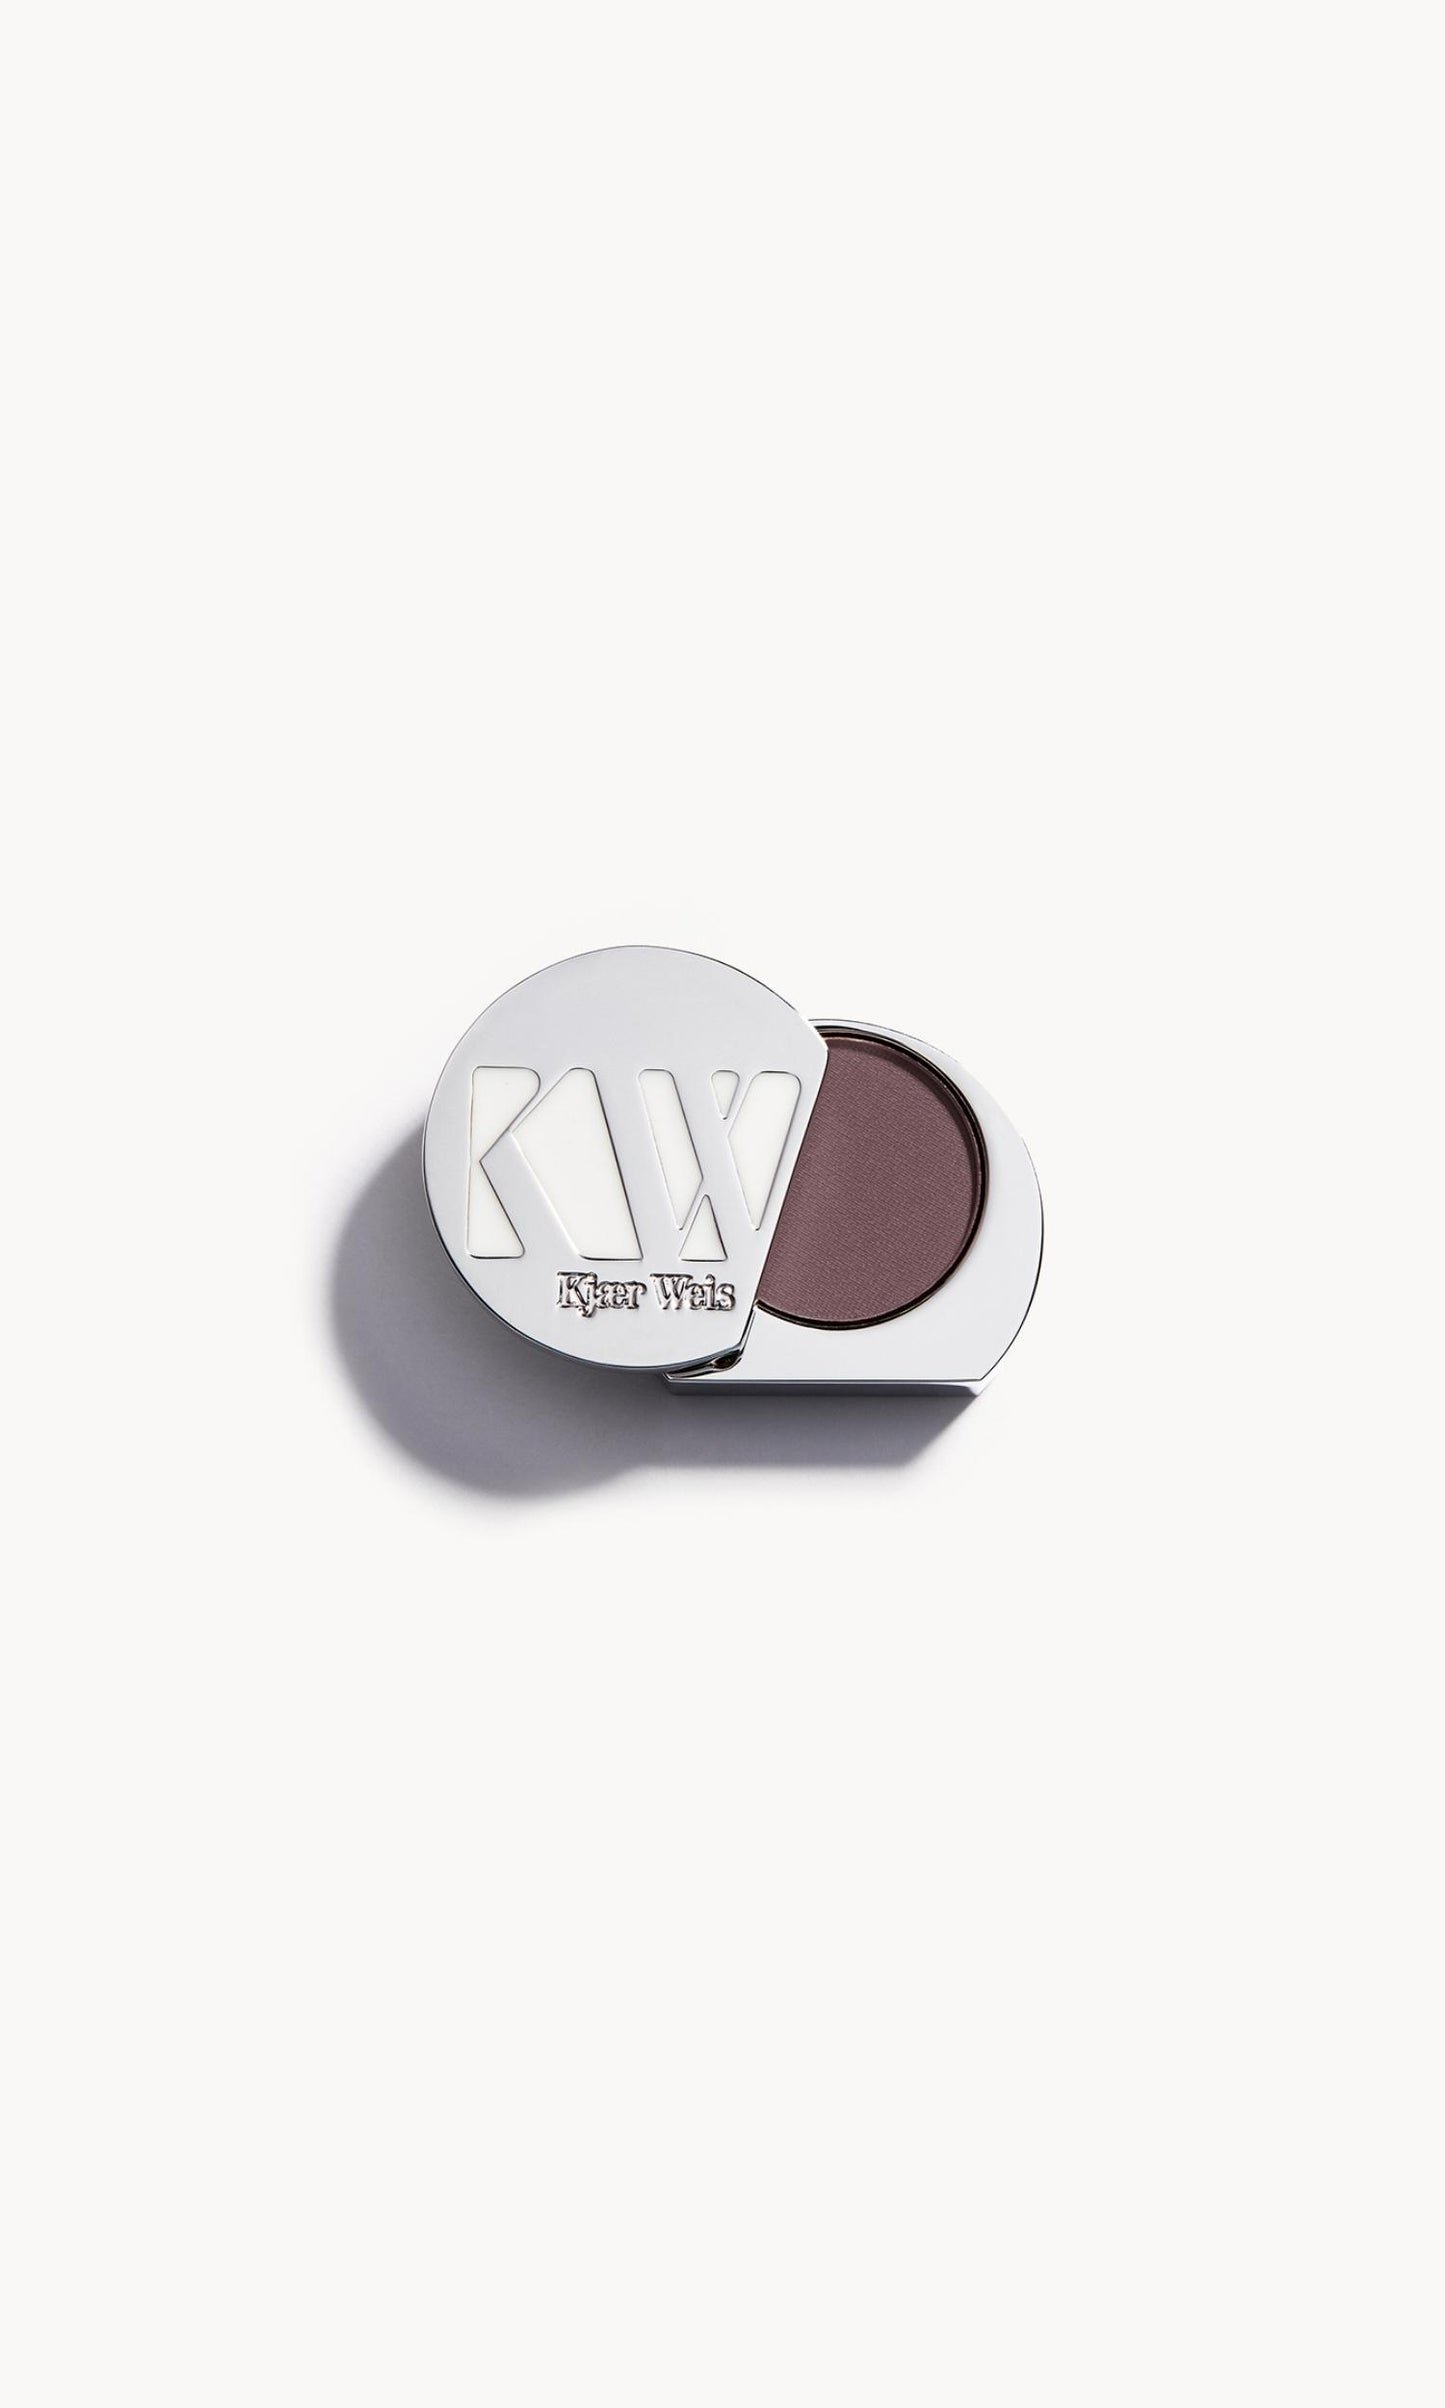 Solid metal KW palette with lid open to show greyish purple eye shadow inside